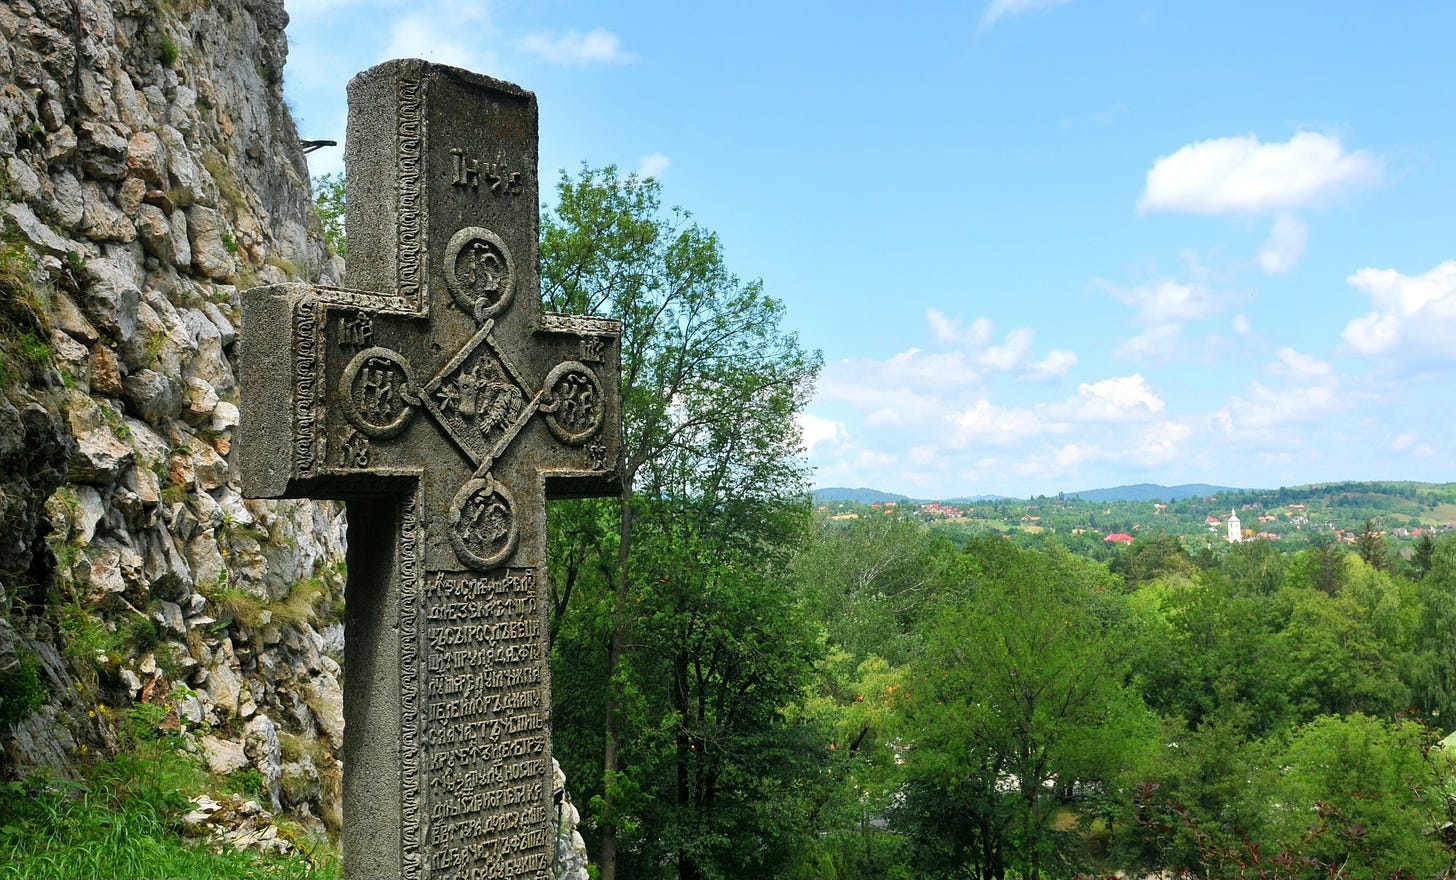 Tombstone in the shape of a cross